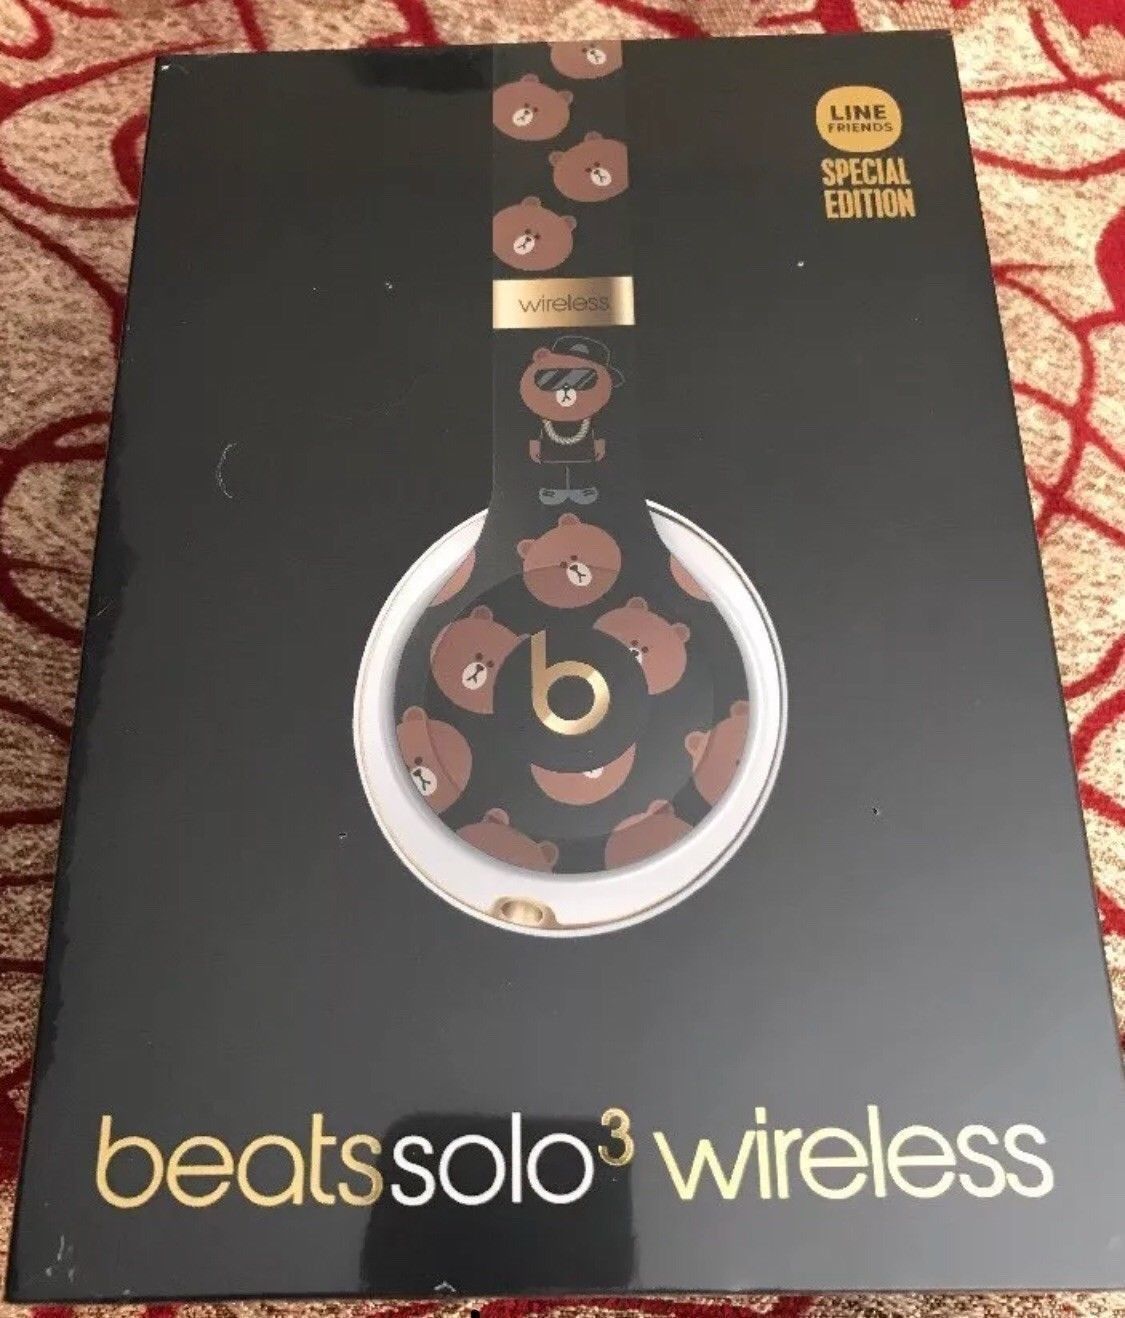 Beats Solo 3 wireless line friends special edition